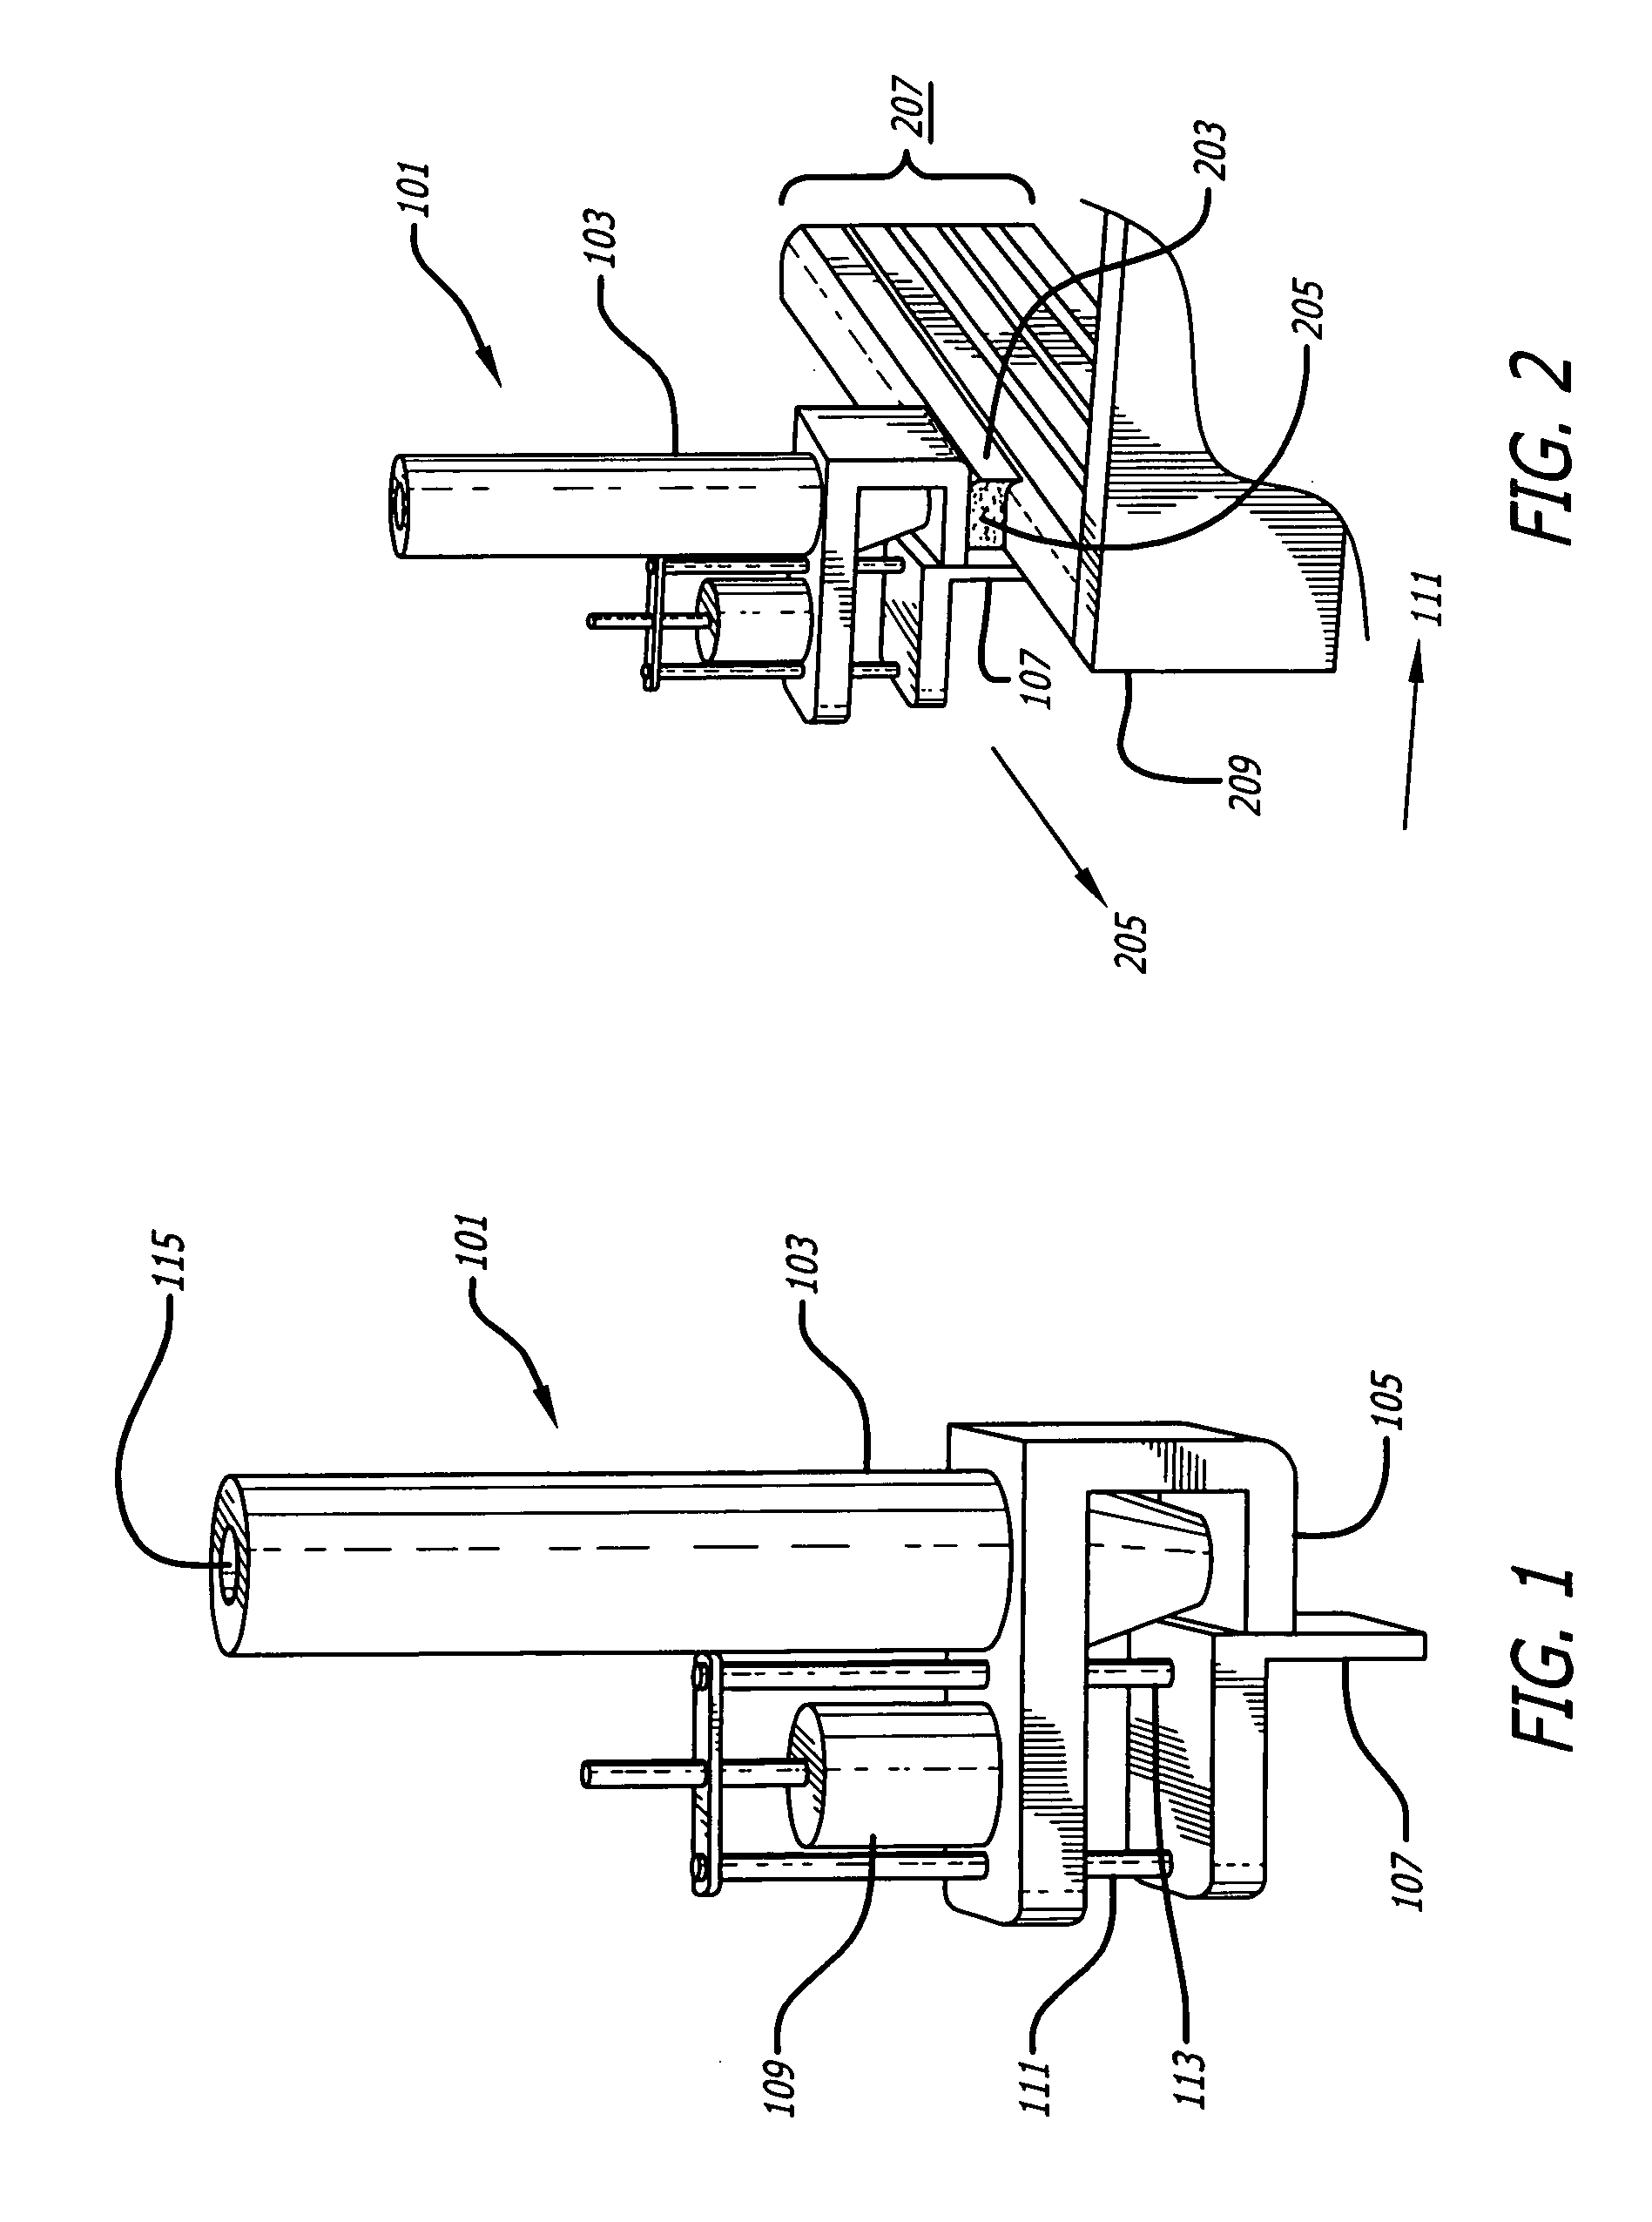 Multi-nozzle assembly for extrusion of wall